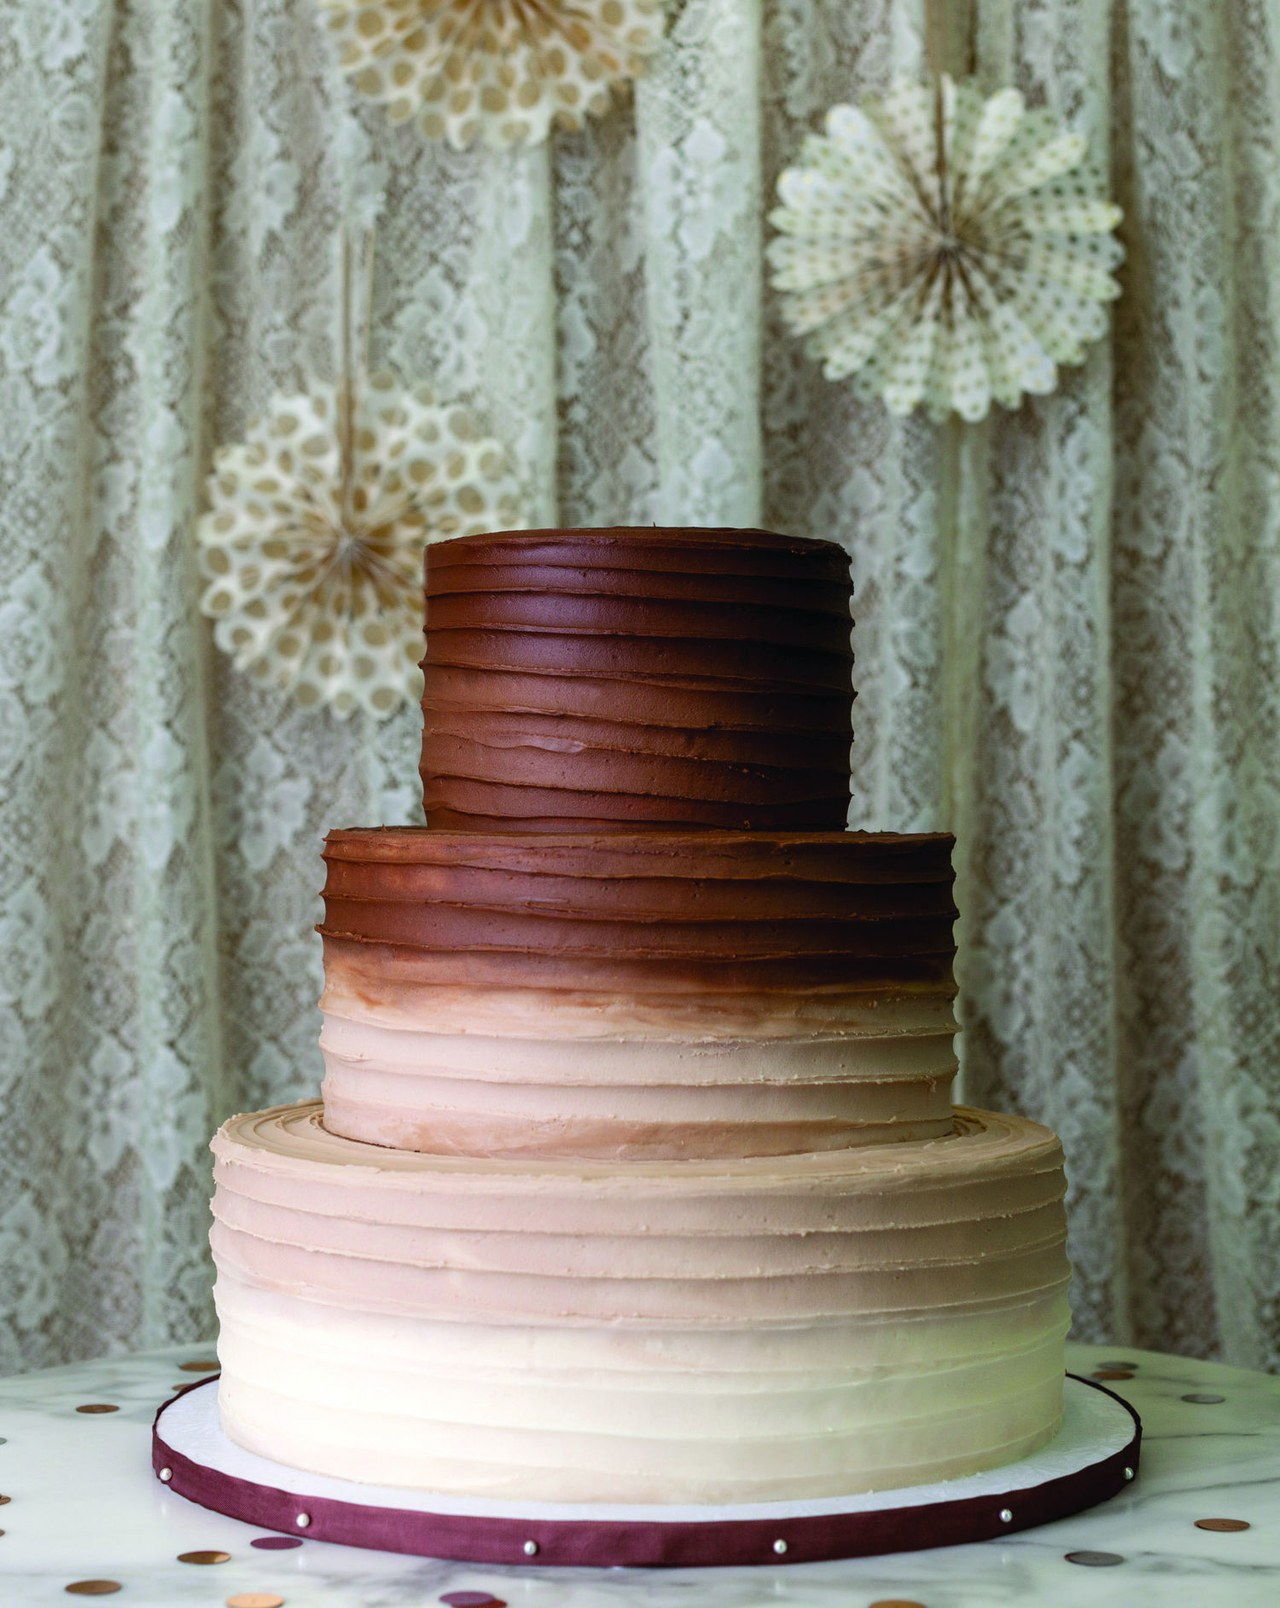 8 pictures of wedding cakes magnolia bakery 0328